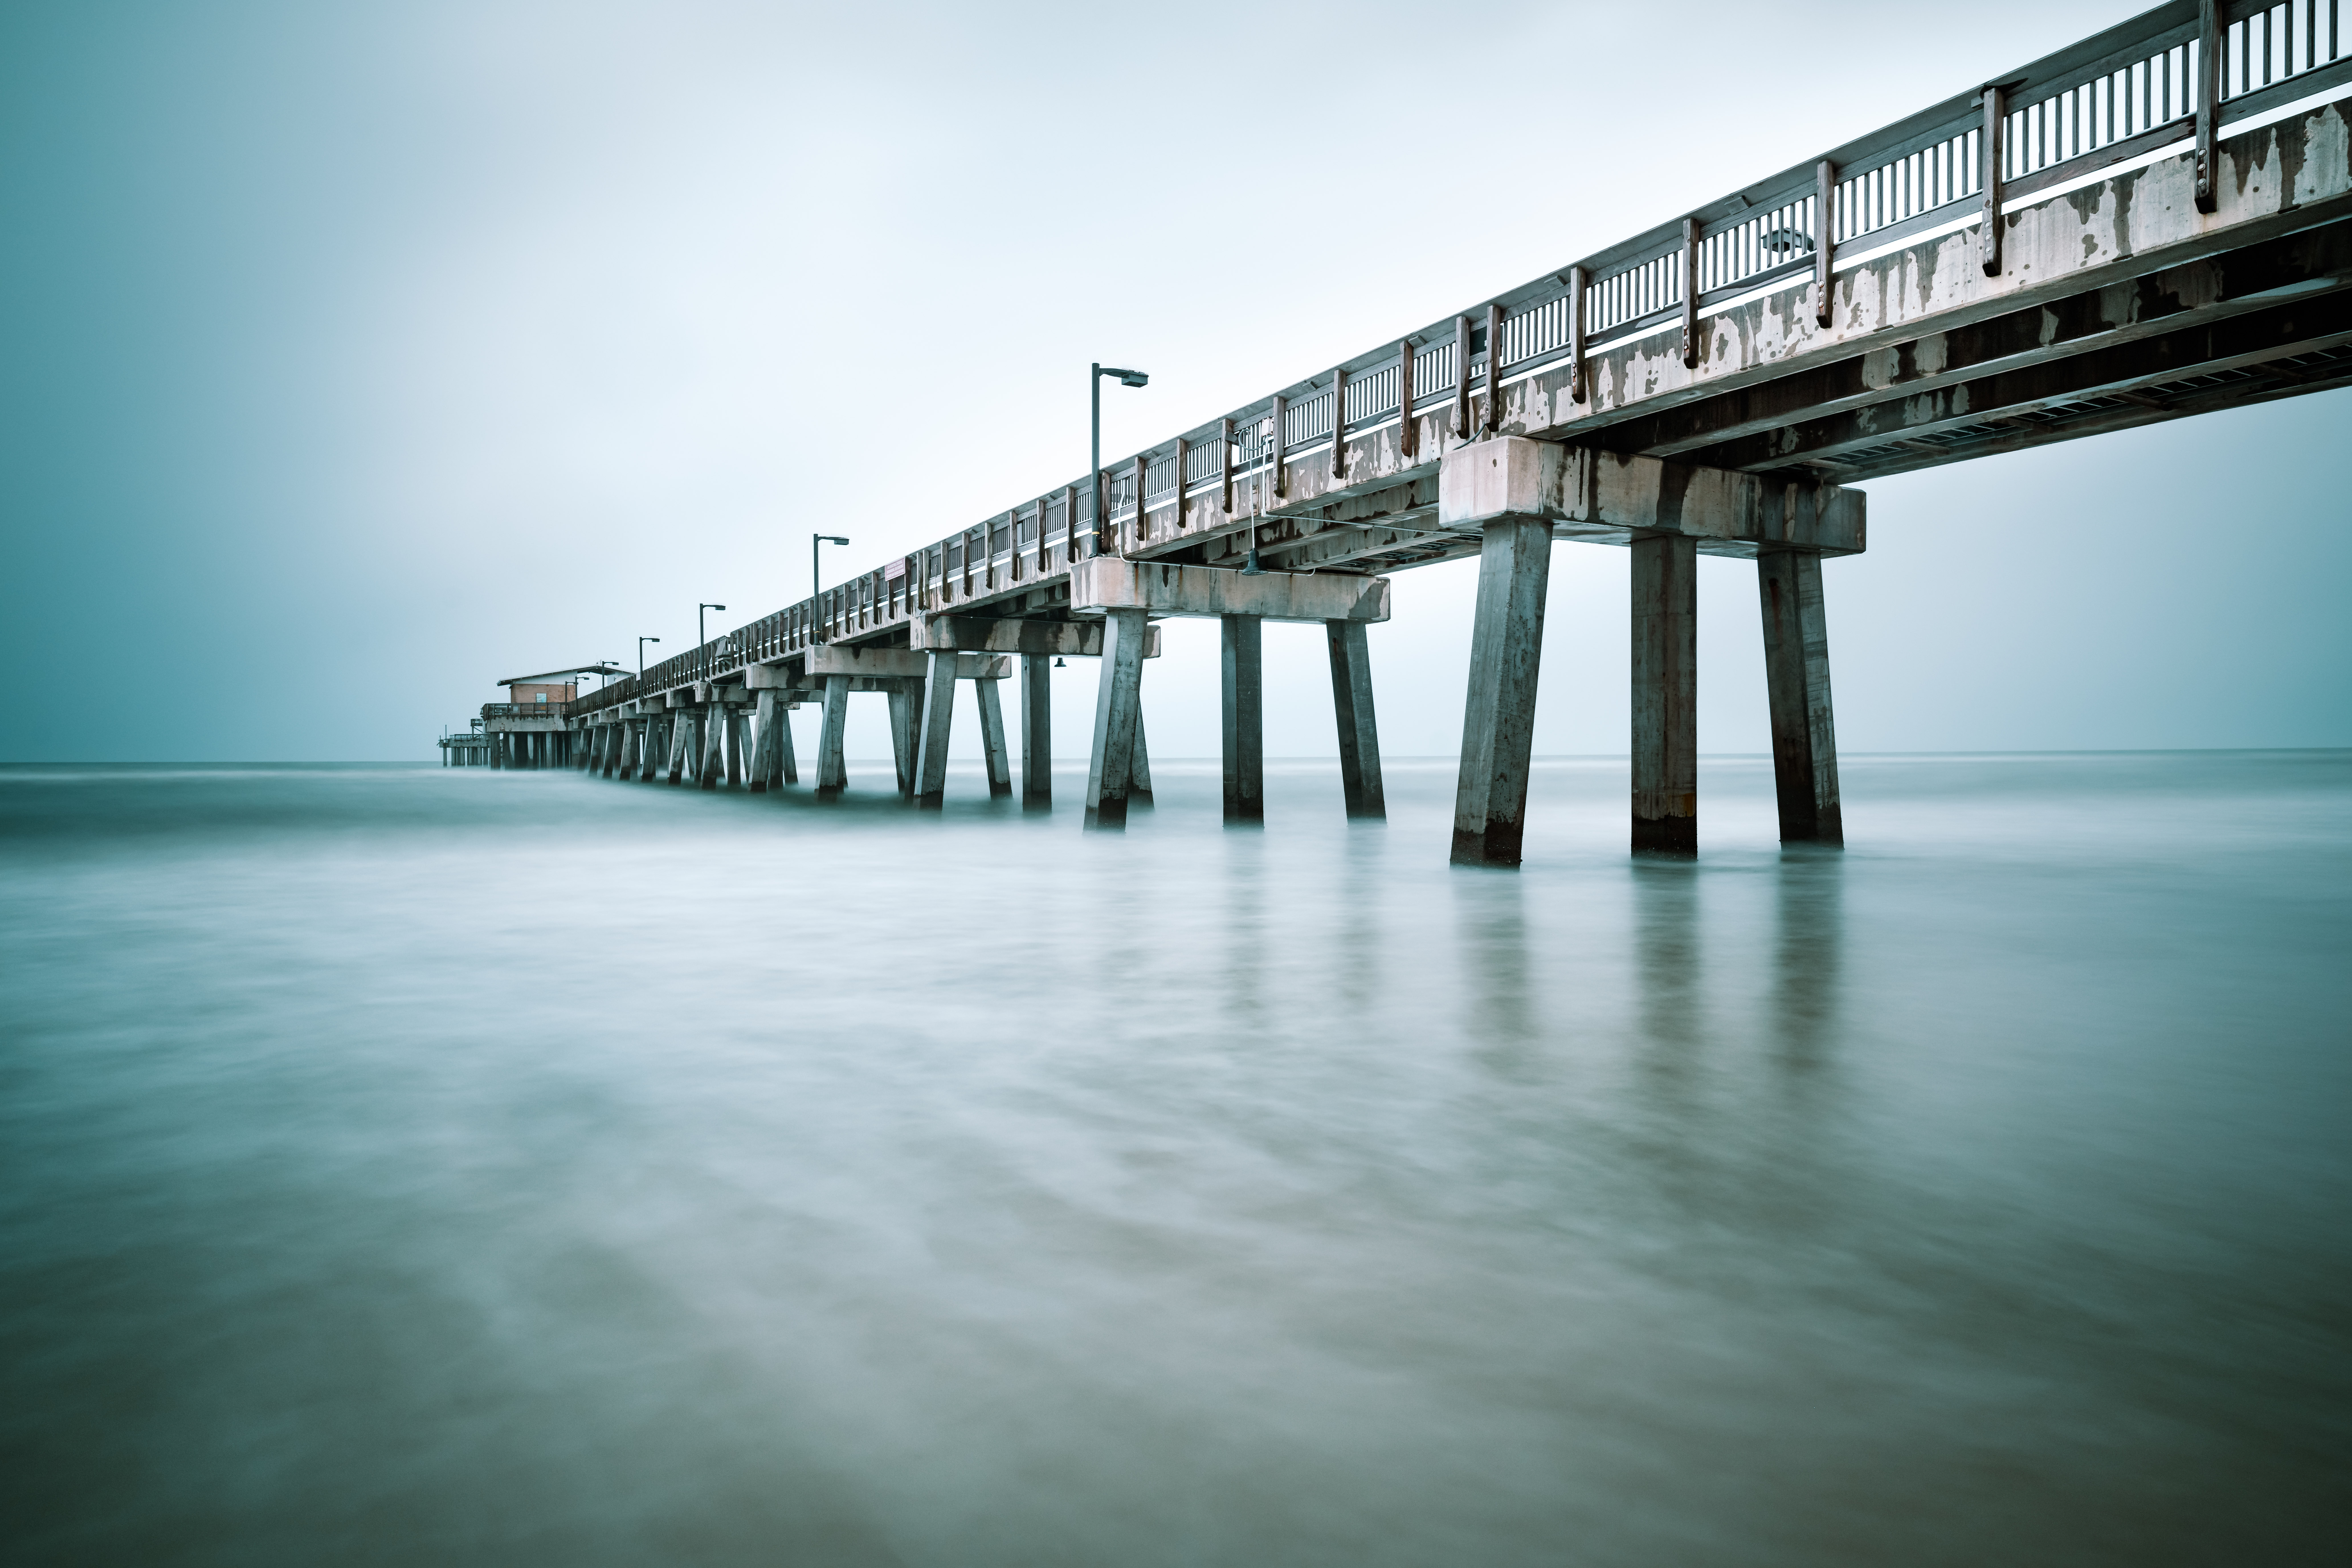 Gulf Shores State Park Pier in a Storm